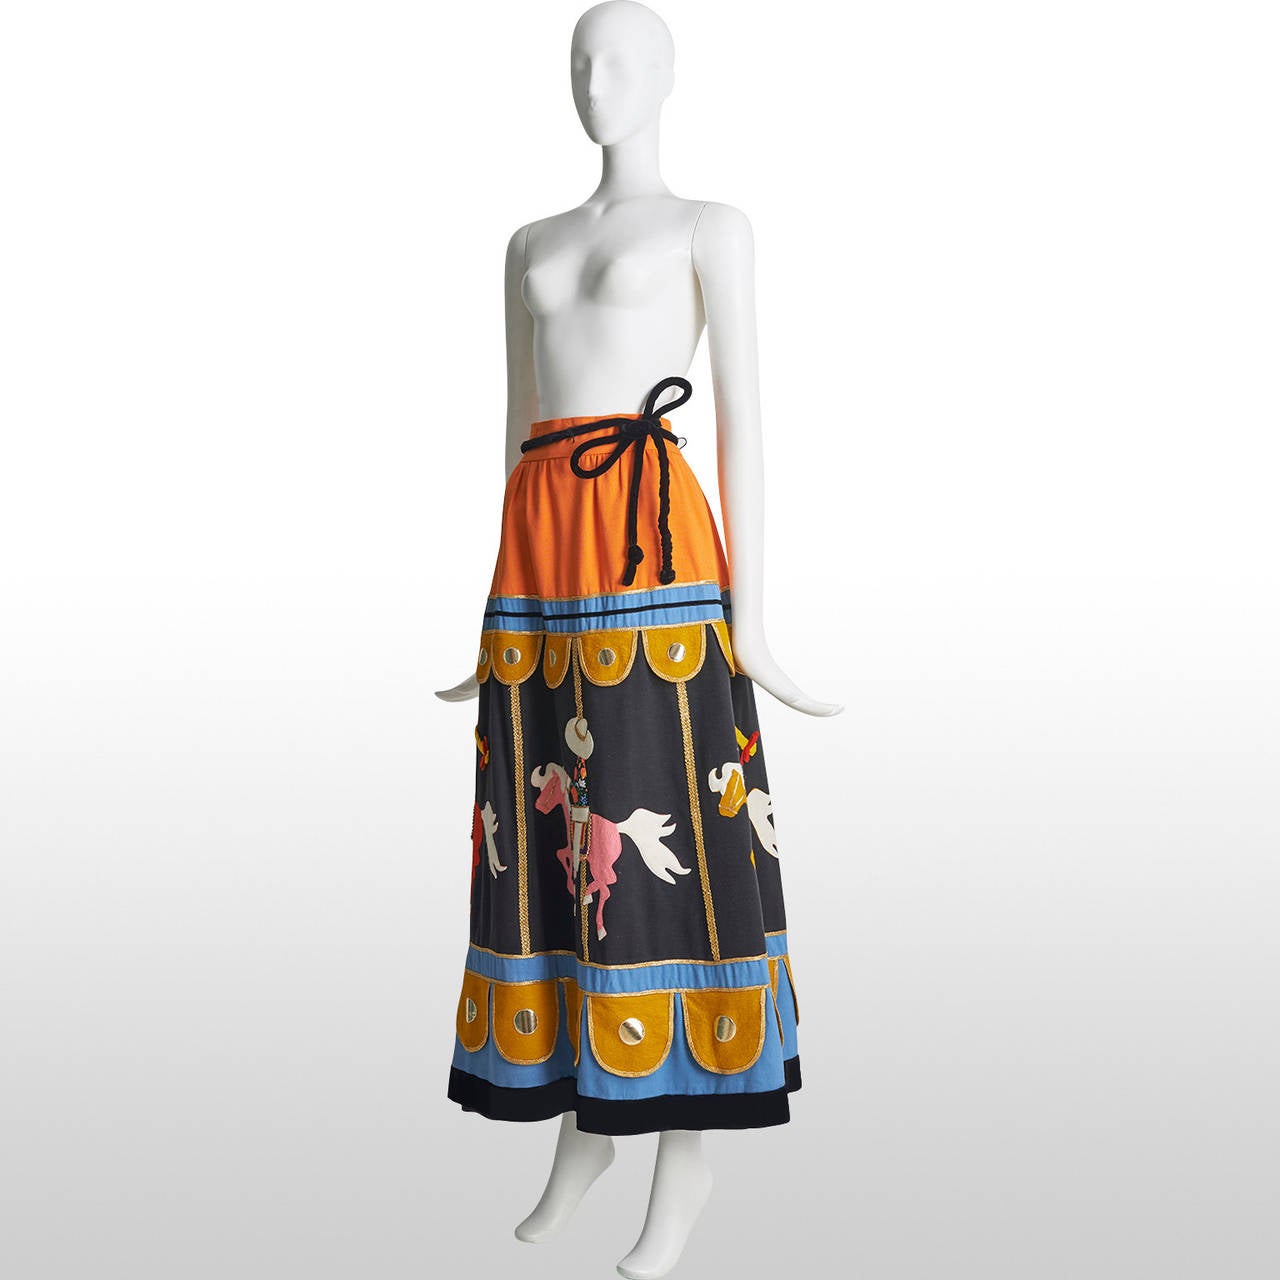 This is a very special piece from the 70s, exhibiting a carousel with people riding its horses, wearing traditional Mexican clothing. The skirt is made out of felt and cotton with metallic bradded trimming. The piece remains in excellent condition.